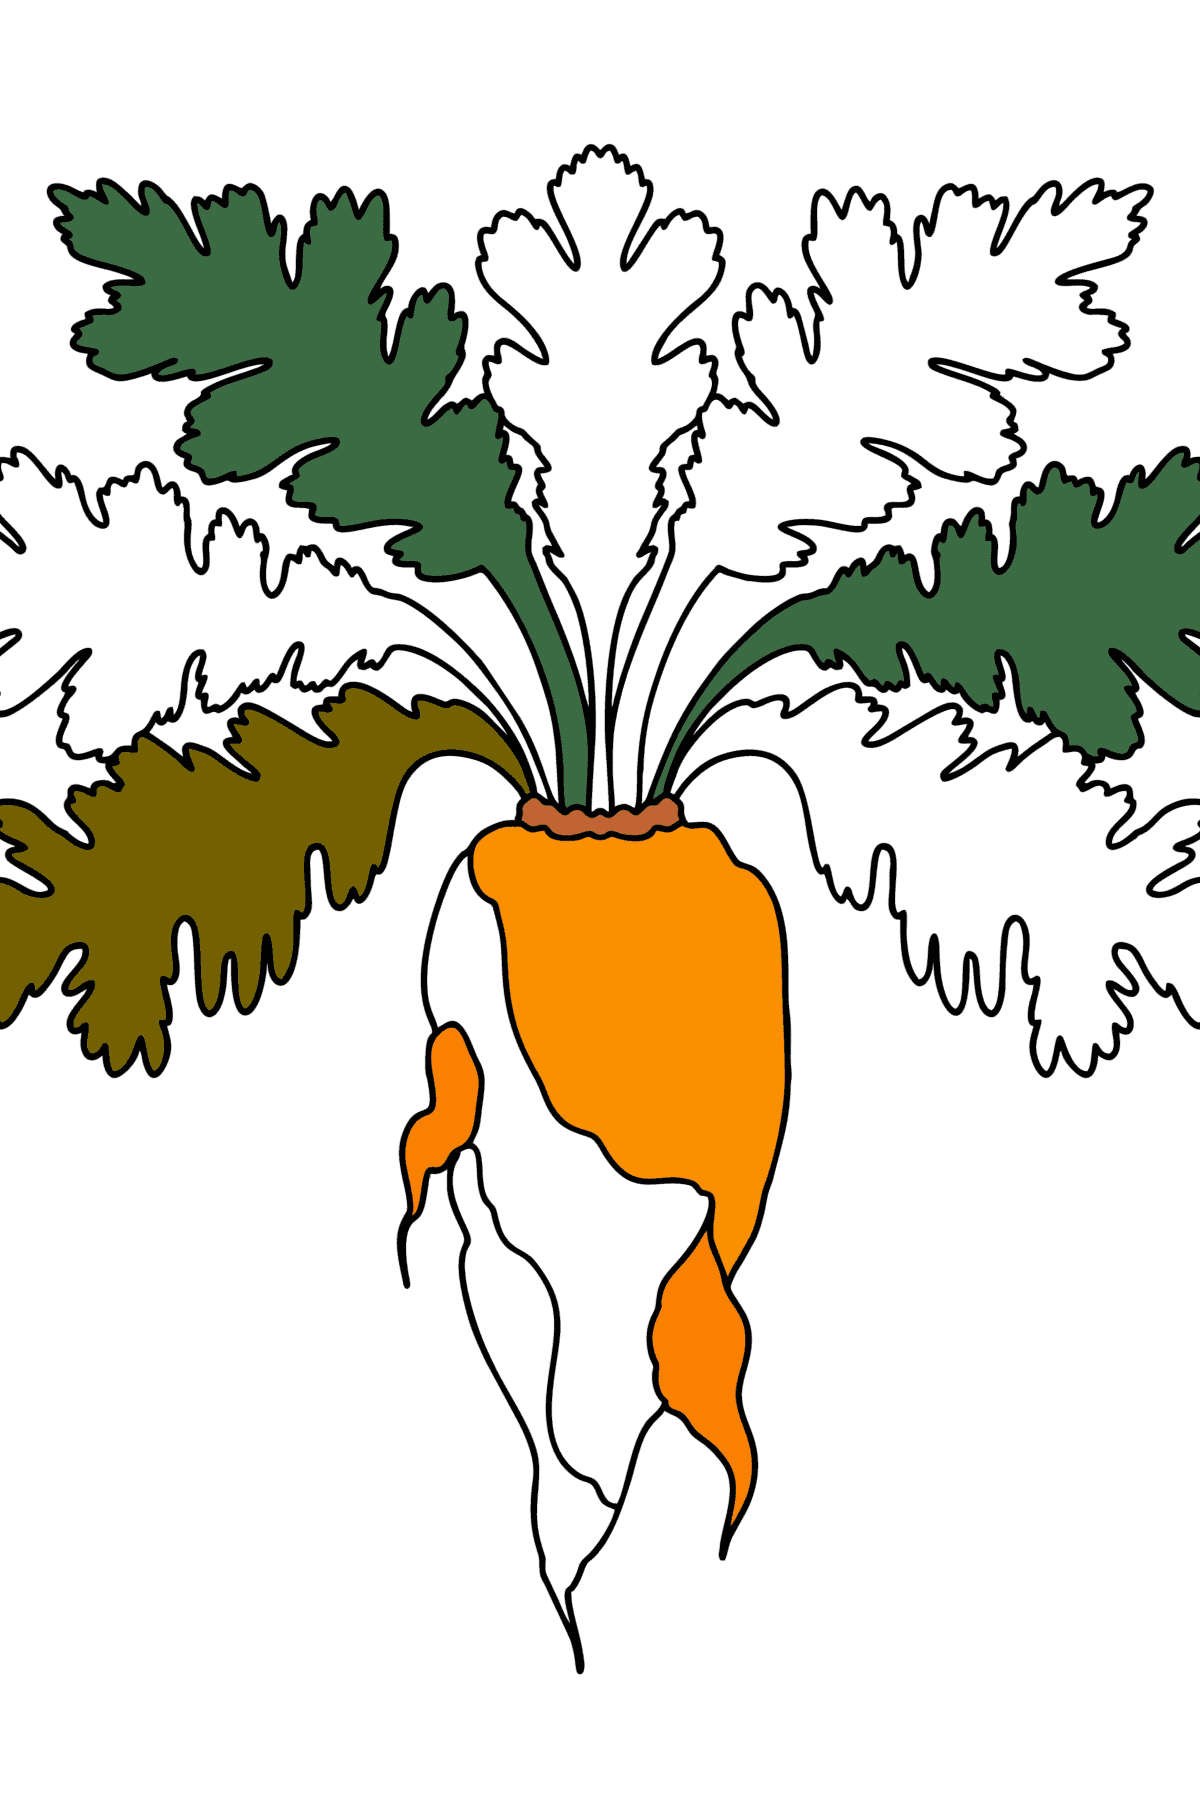 Ripe carrot сoloring page - Coloring Pages for Kids